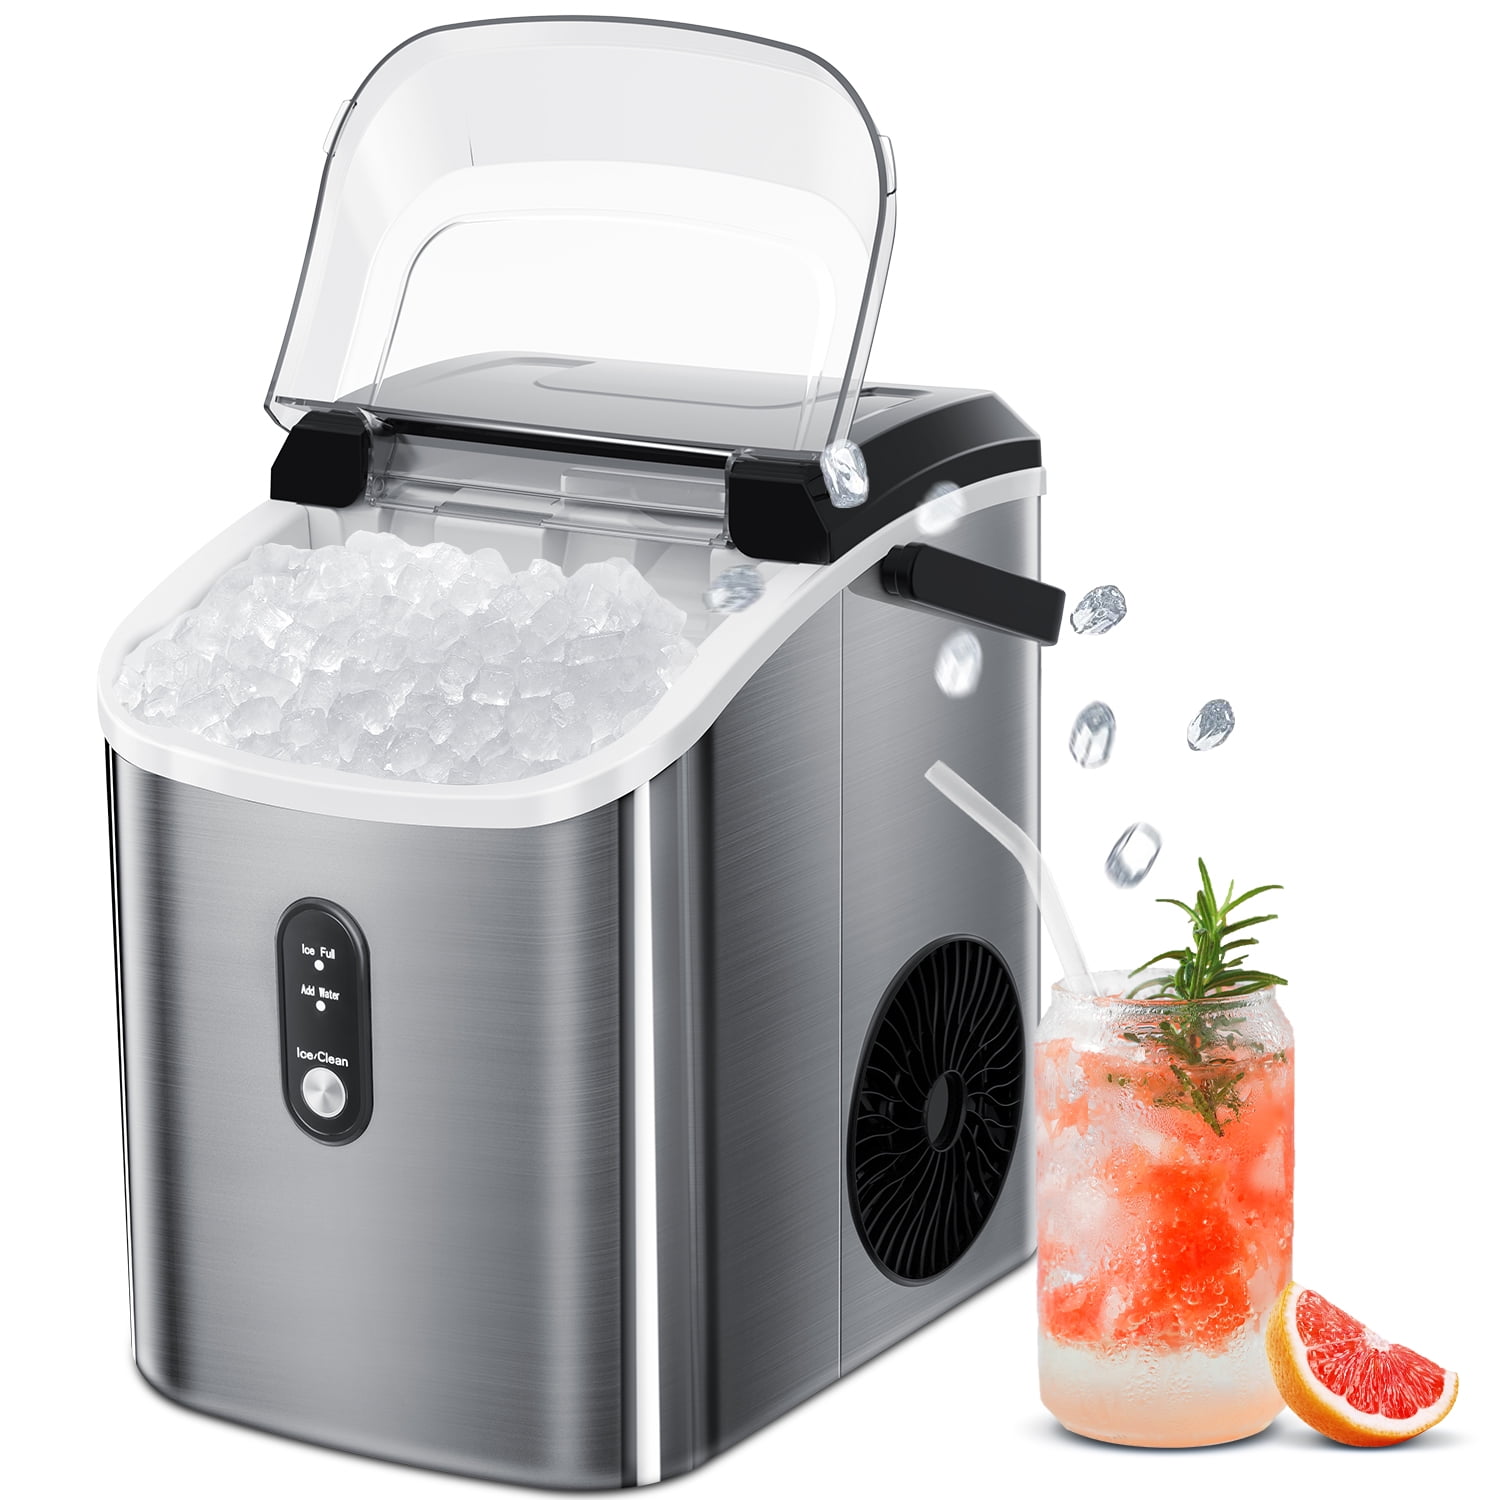  Kismile Nugget Ice Makers Countertop,Portable Ice Maker Machine  with Crushed Ice, 35lbs/Day,One-Click Operation,Self-Cleaning Countertop ice  machine,Pellet Ice Maker Countertop for Home/Kitchen/Office : Appliances